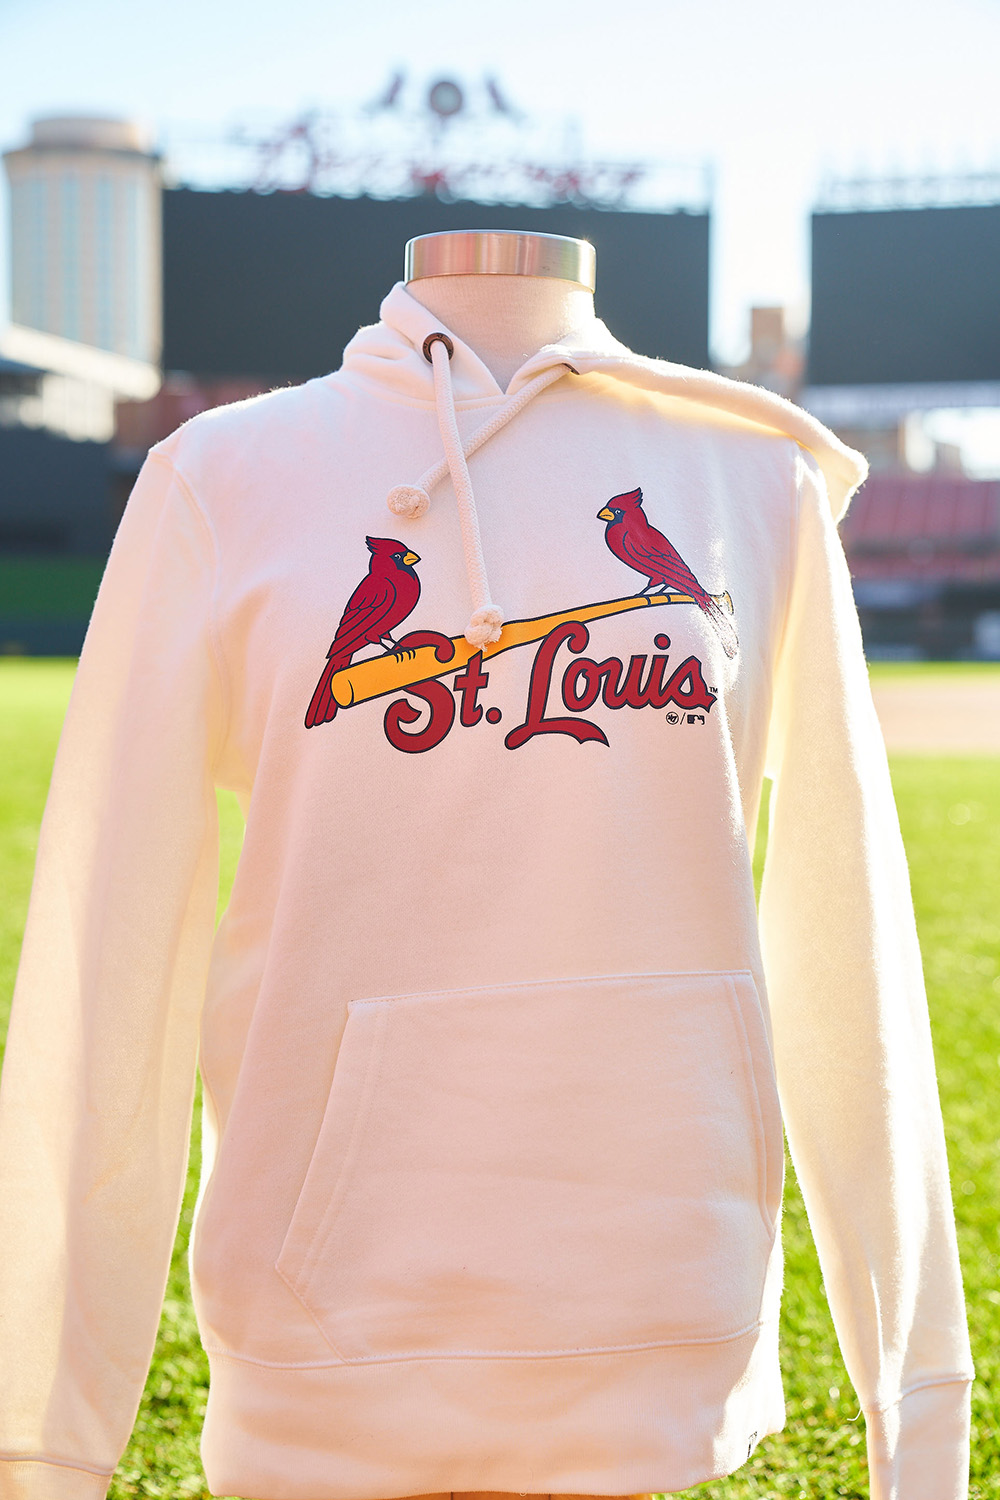 cardinals clubhouse store